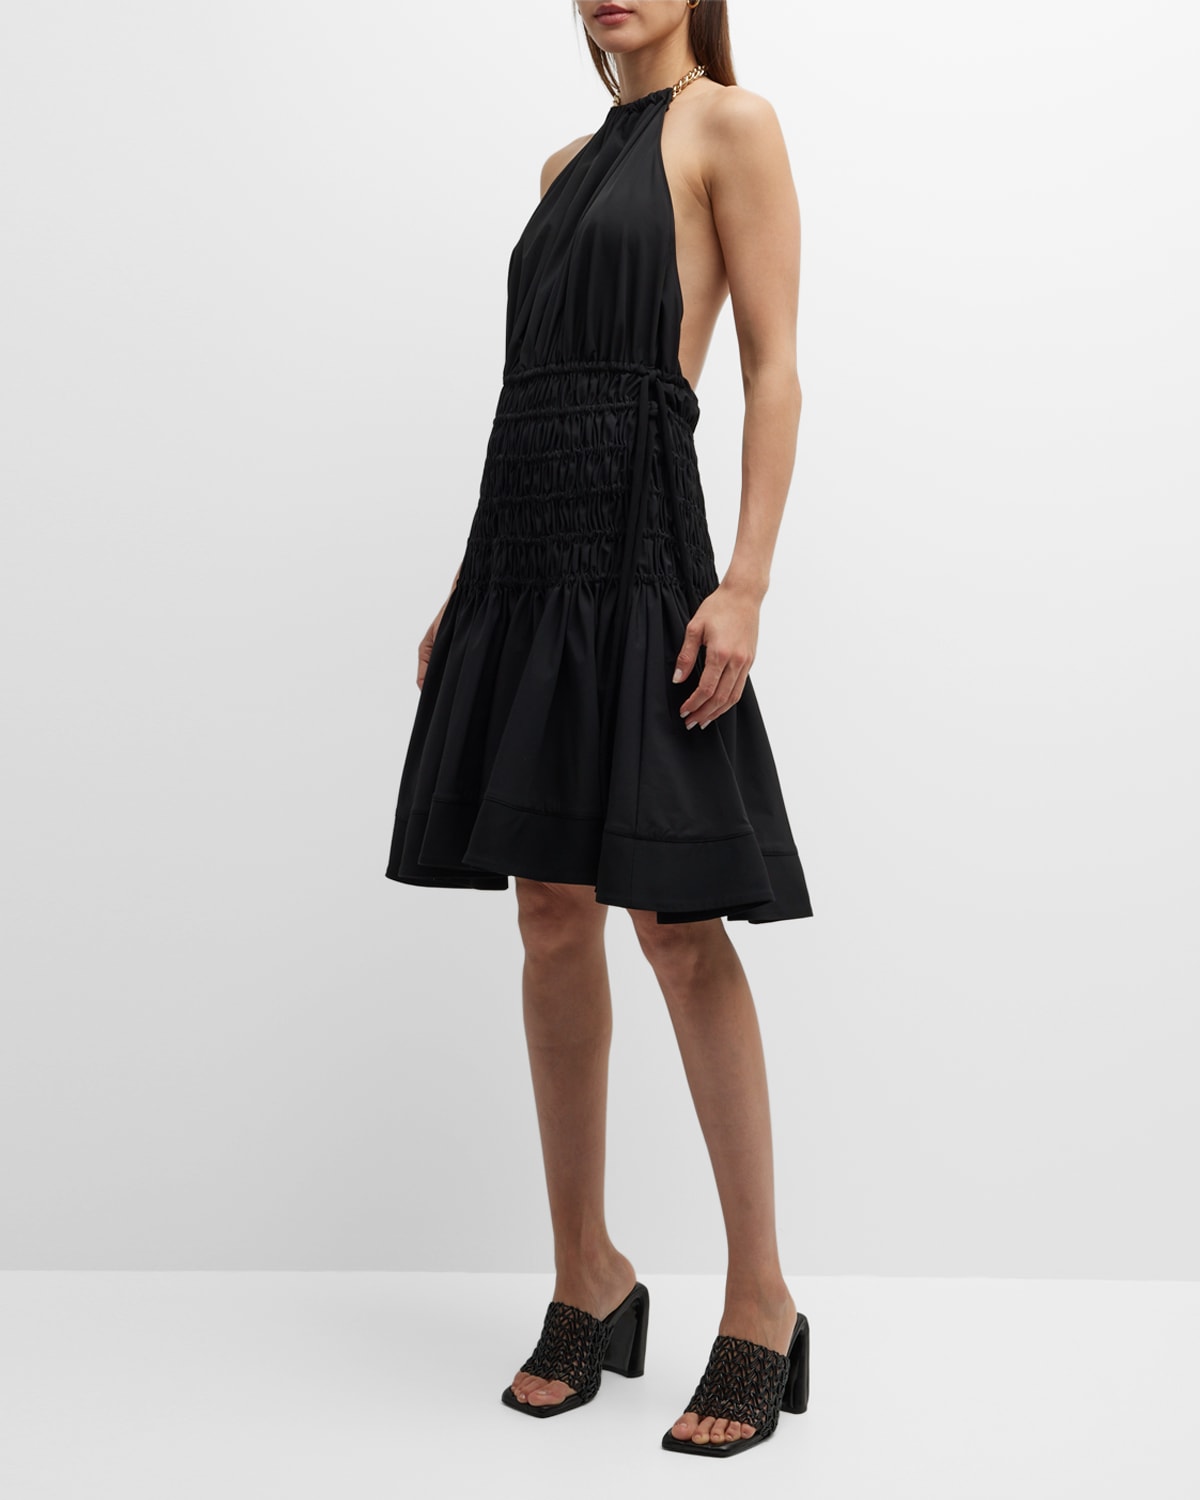 PROENZA SCHOULER RUCHED HALTER DRESS WITH CHAIN COLLAR